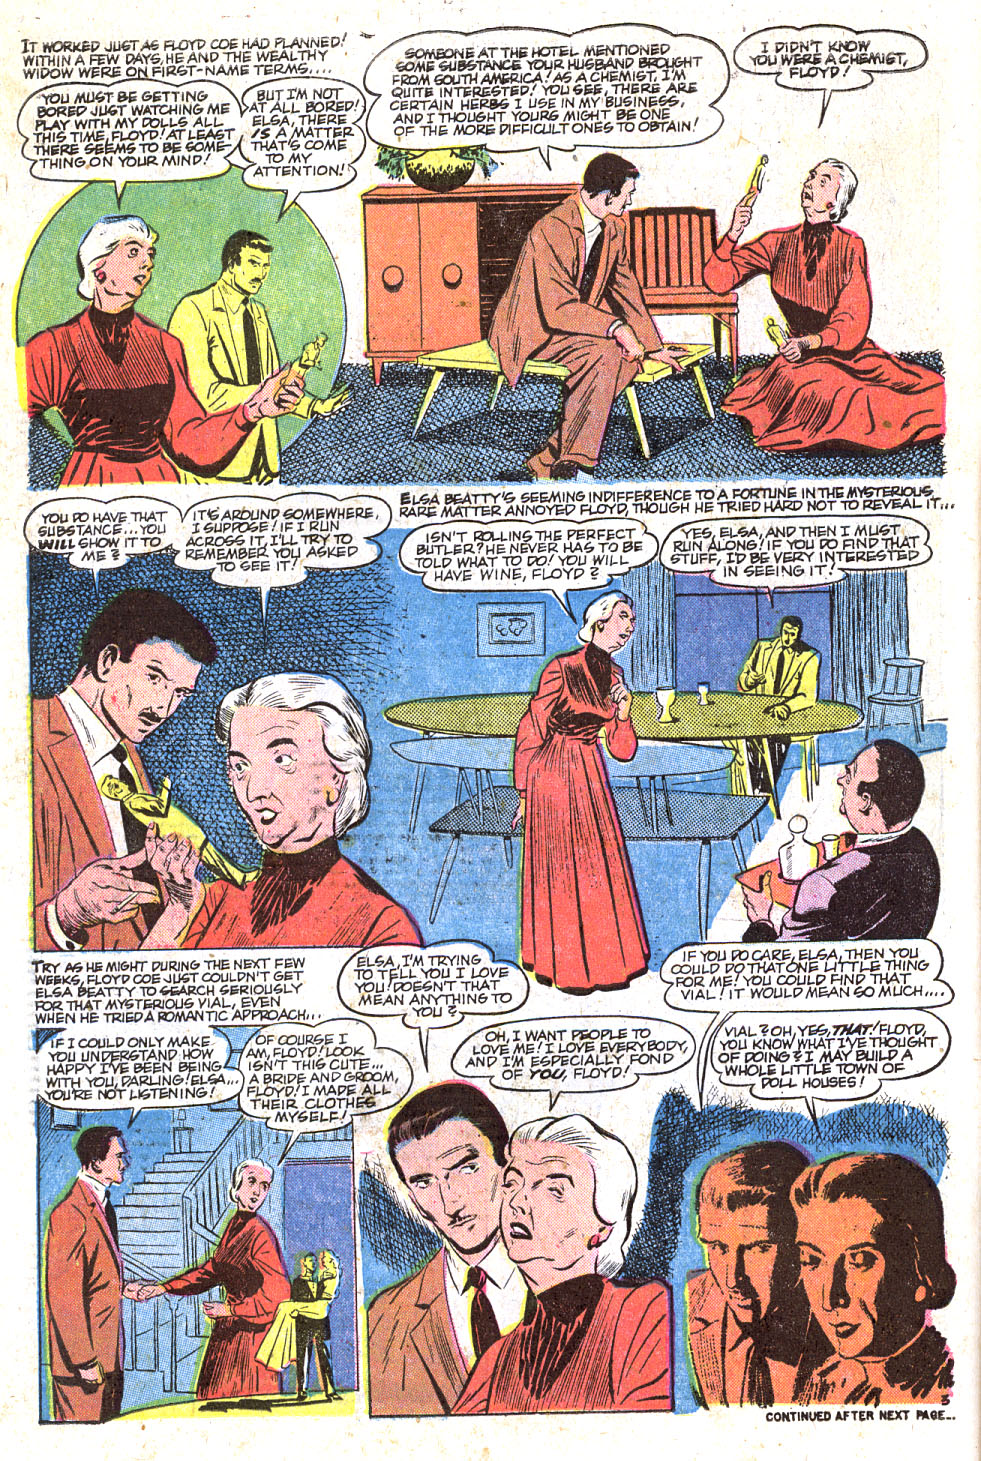 Journey Into Mystery (1952) 48 Page 9